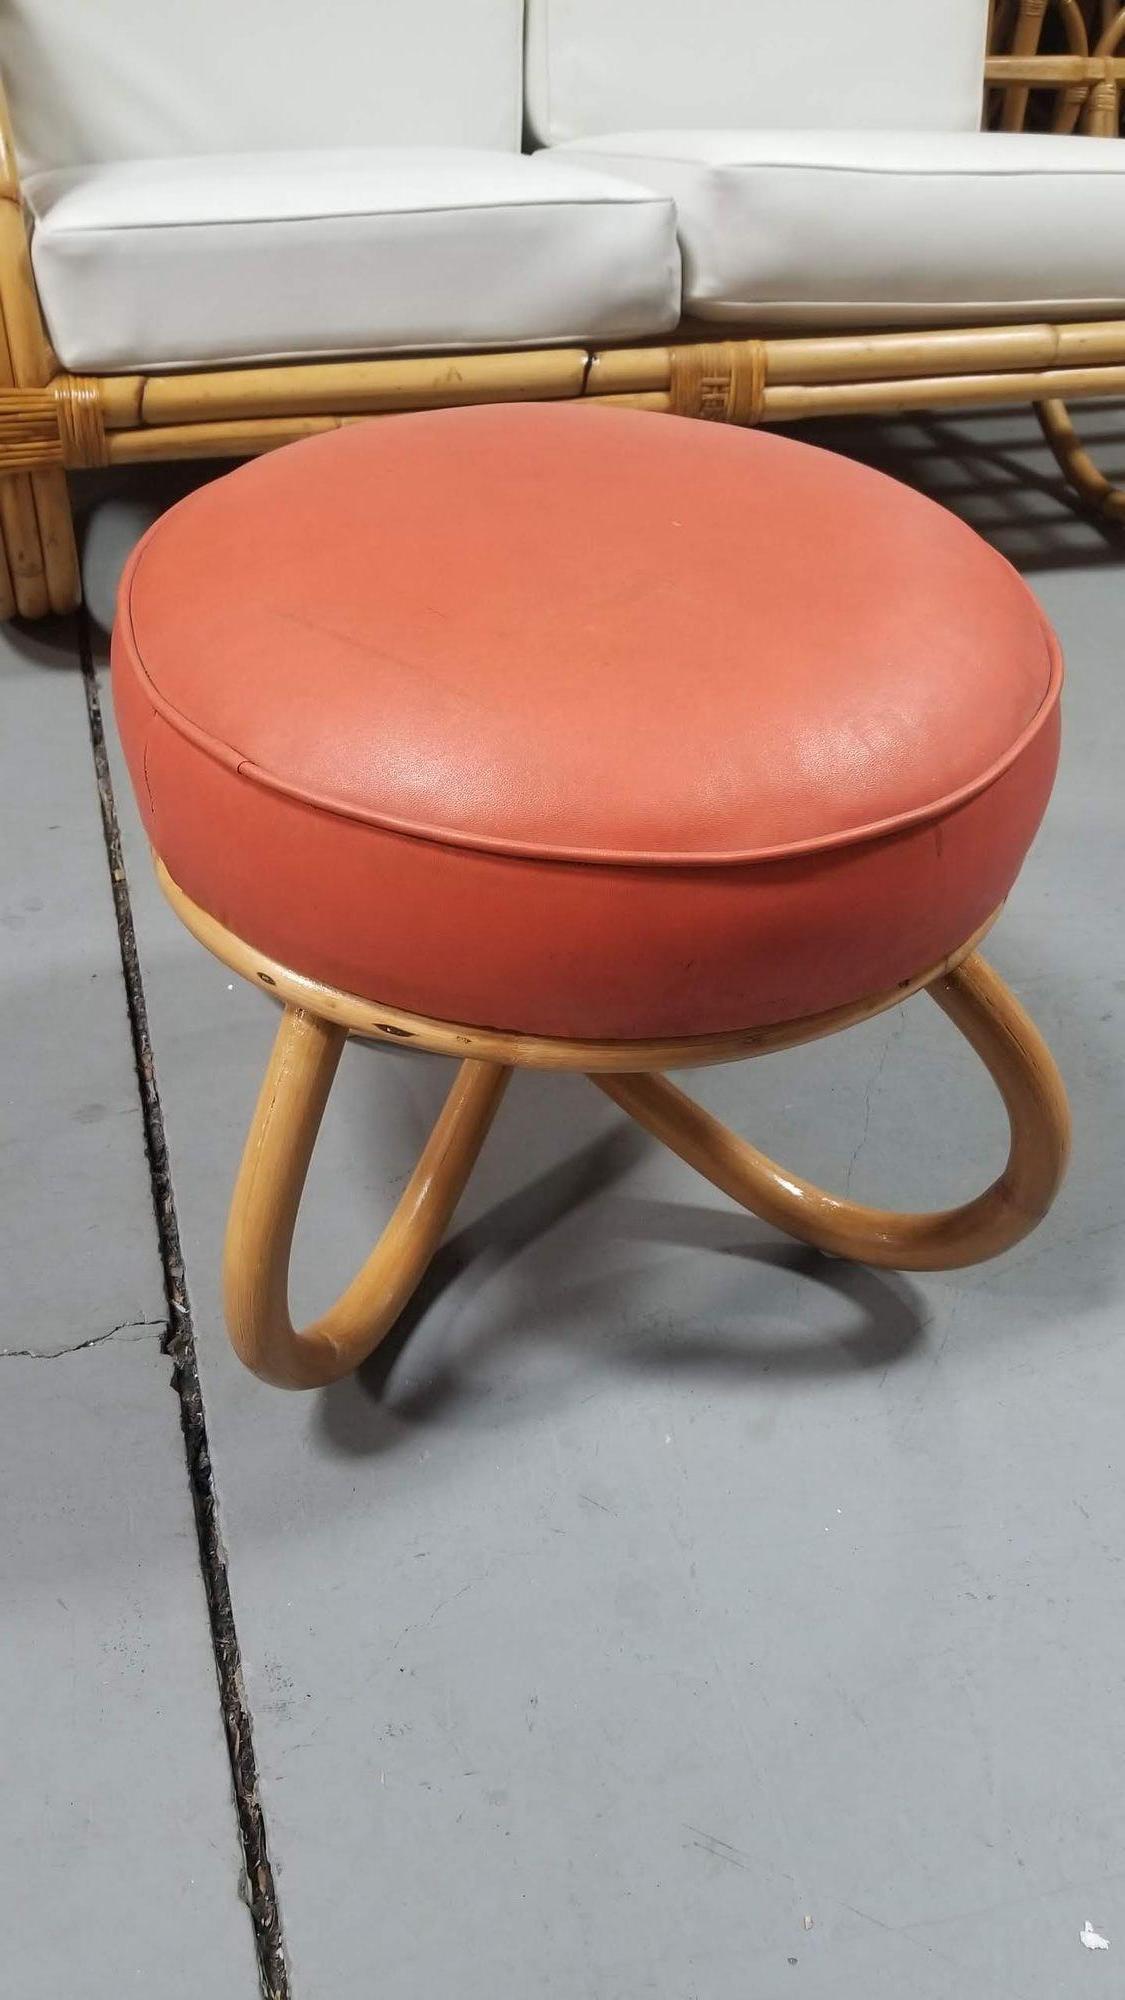 Restored Coral Orange Naugahyde Footstool In Excellent Condition For Sale In Van Nuys, CA